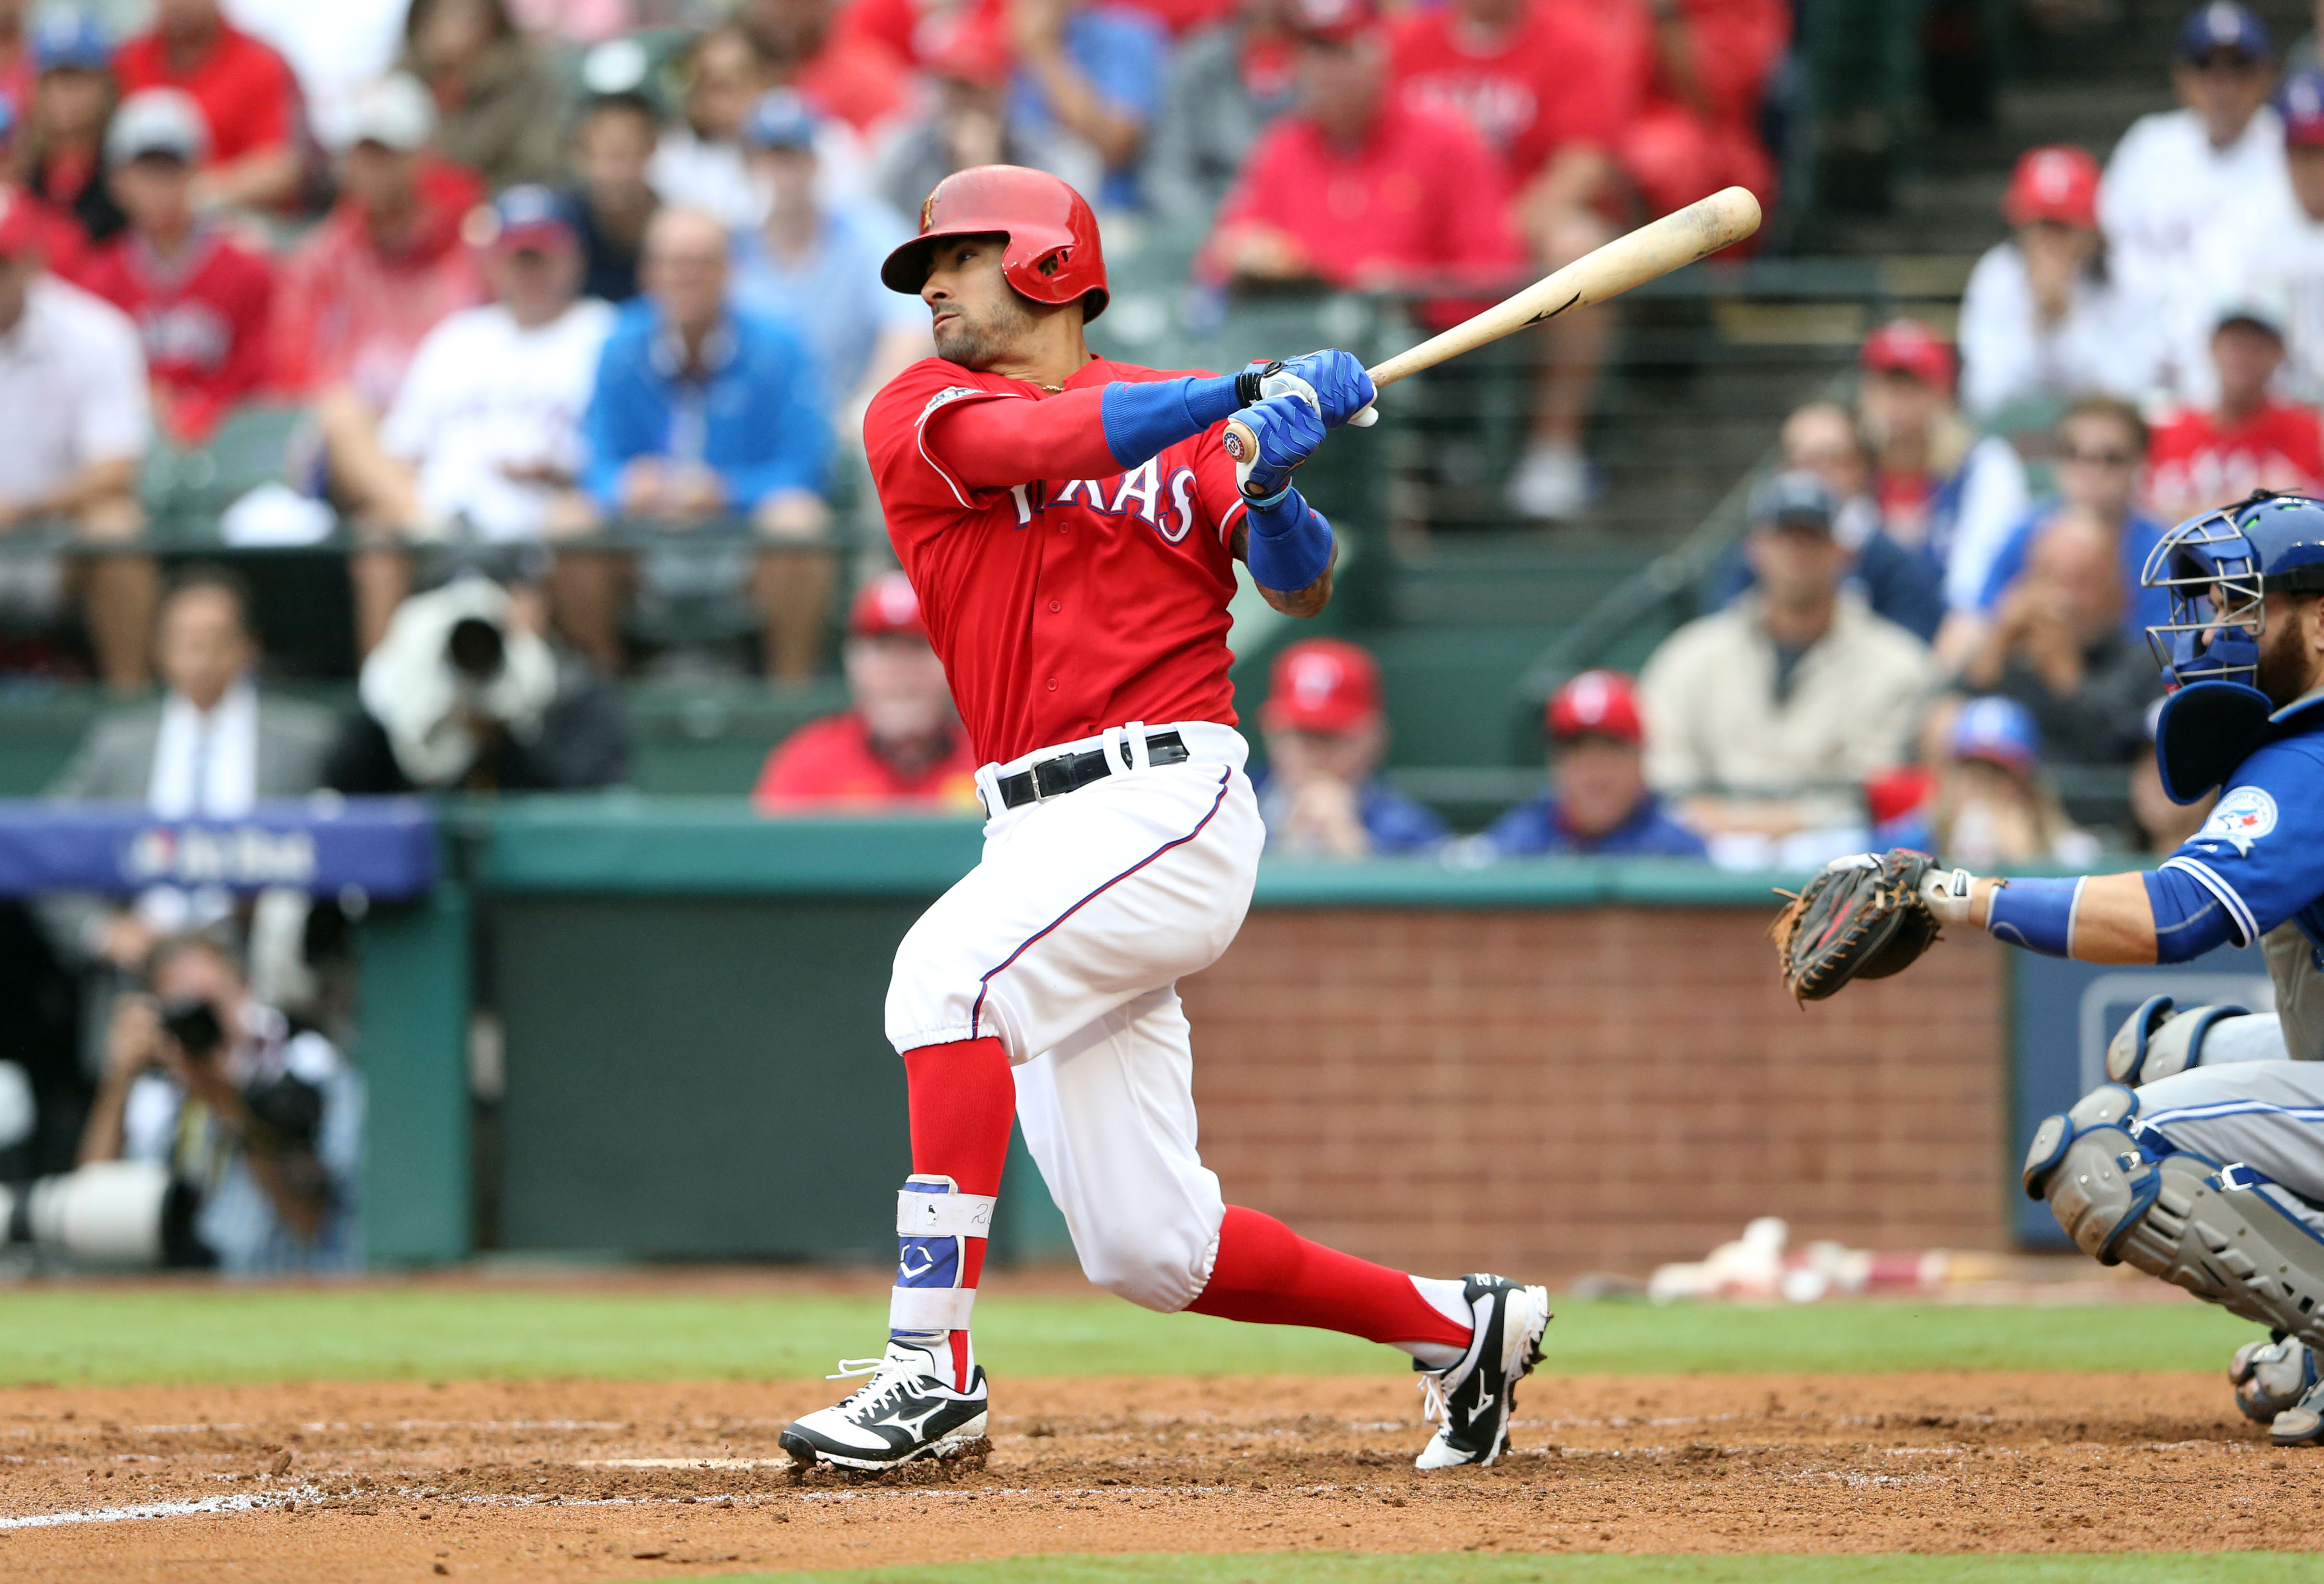 Oct 7, 2016; Arlington, TX, USA; Texas Rangers center fielder Ian Desmond (20) hits an RBI single against the Toronto Blue Jays during the fourth inning of game two of the 2016 ALDS playoff baseball series at Globe Life Park in Arlington. Mandatory Credit: Kevin Jairaj-USA TODAY Sports